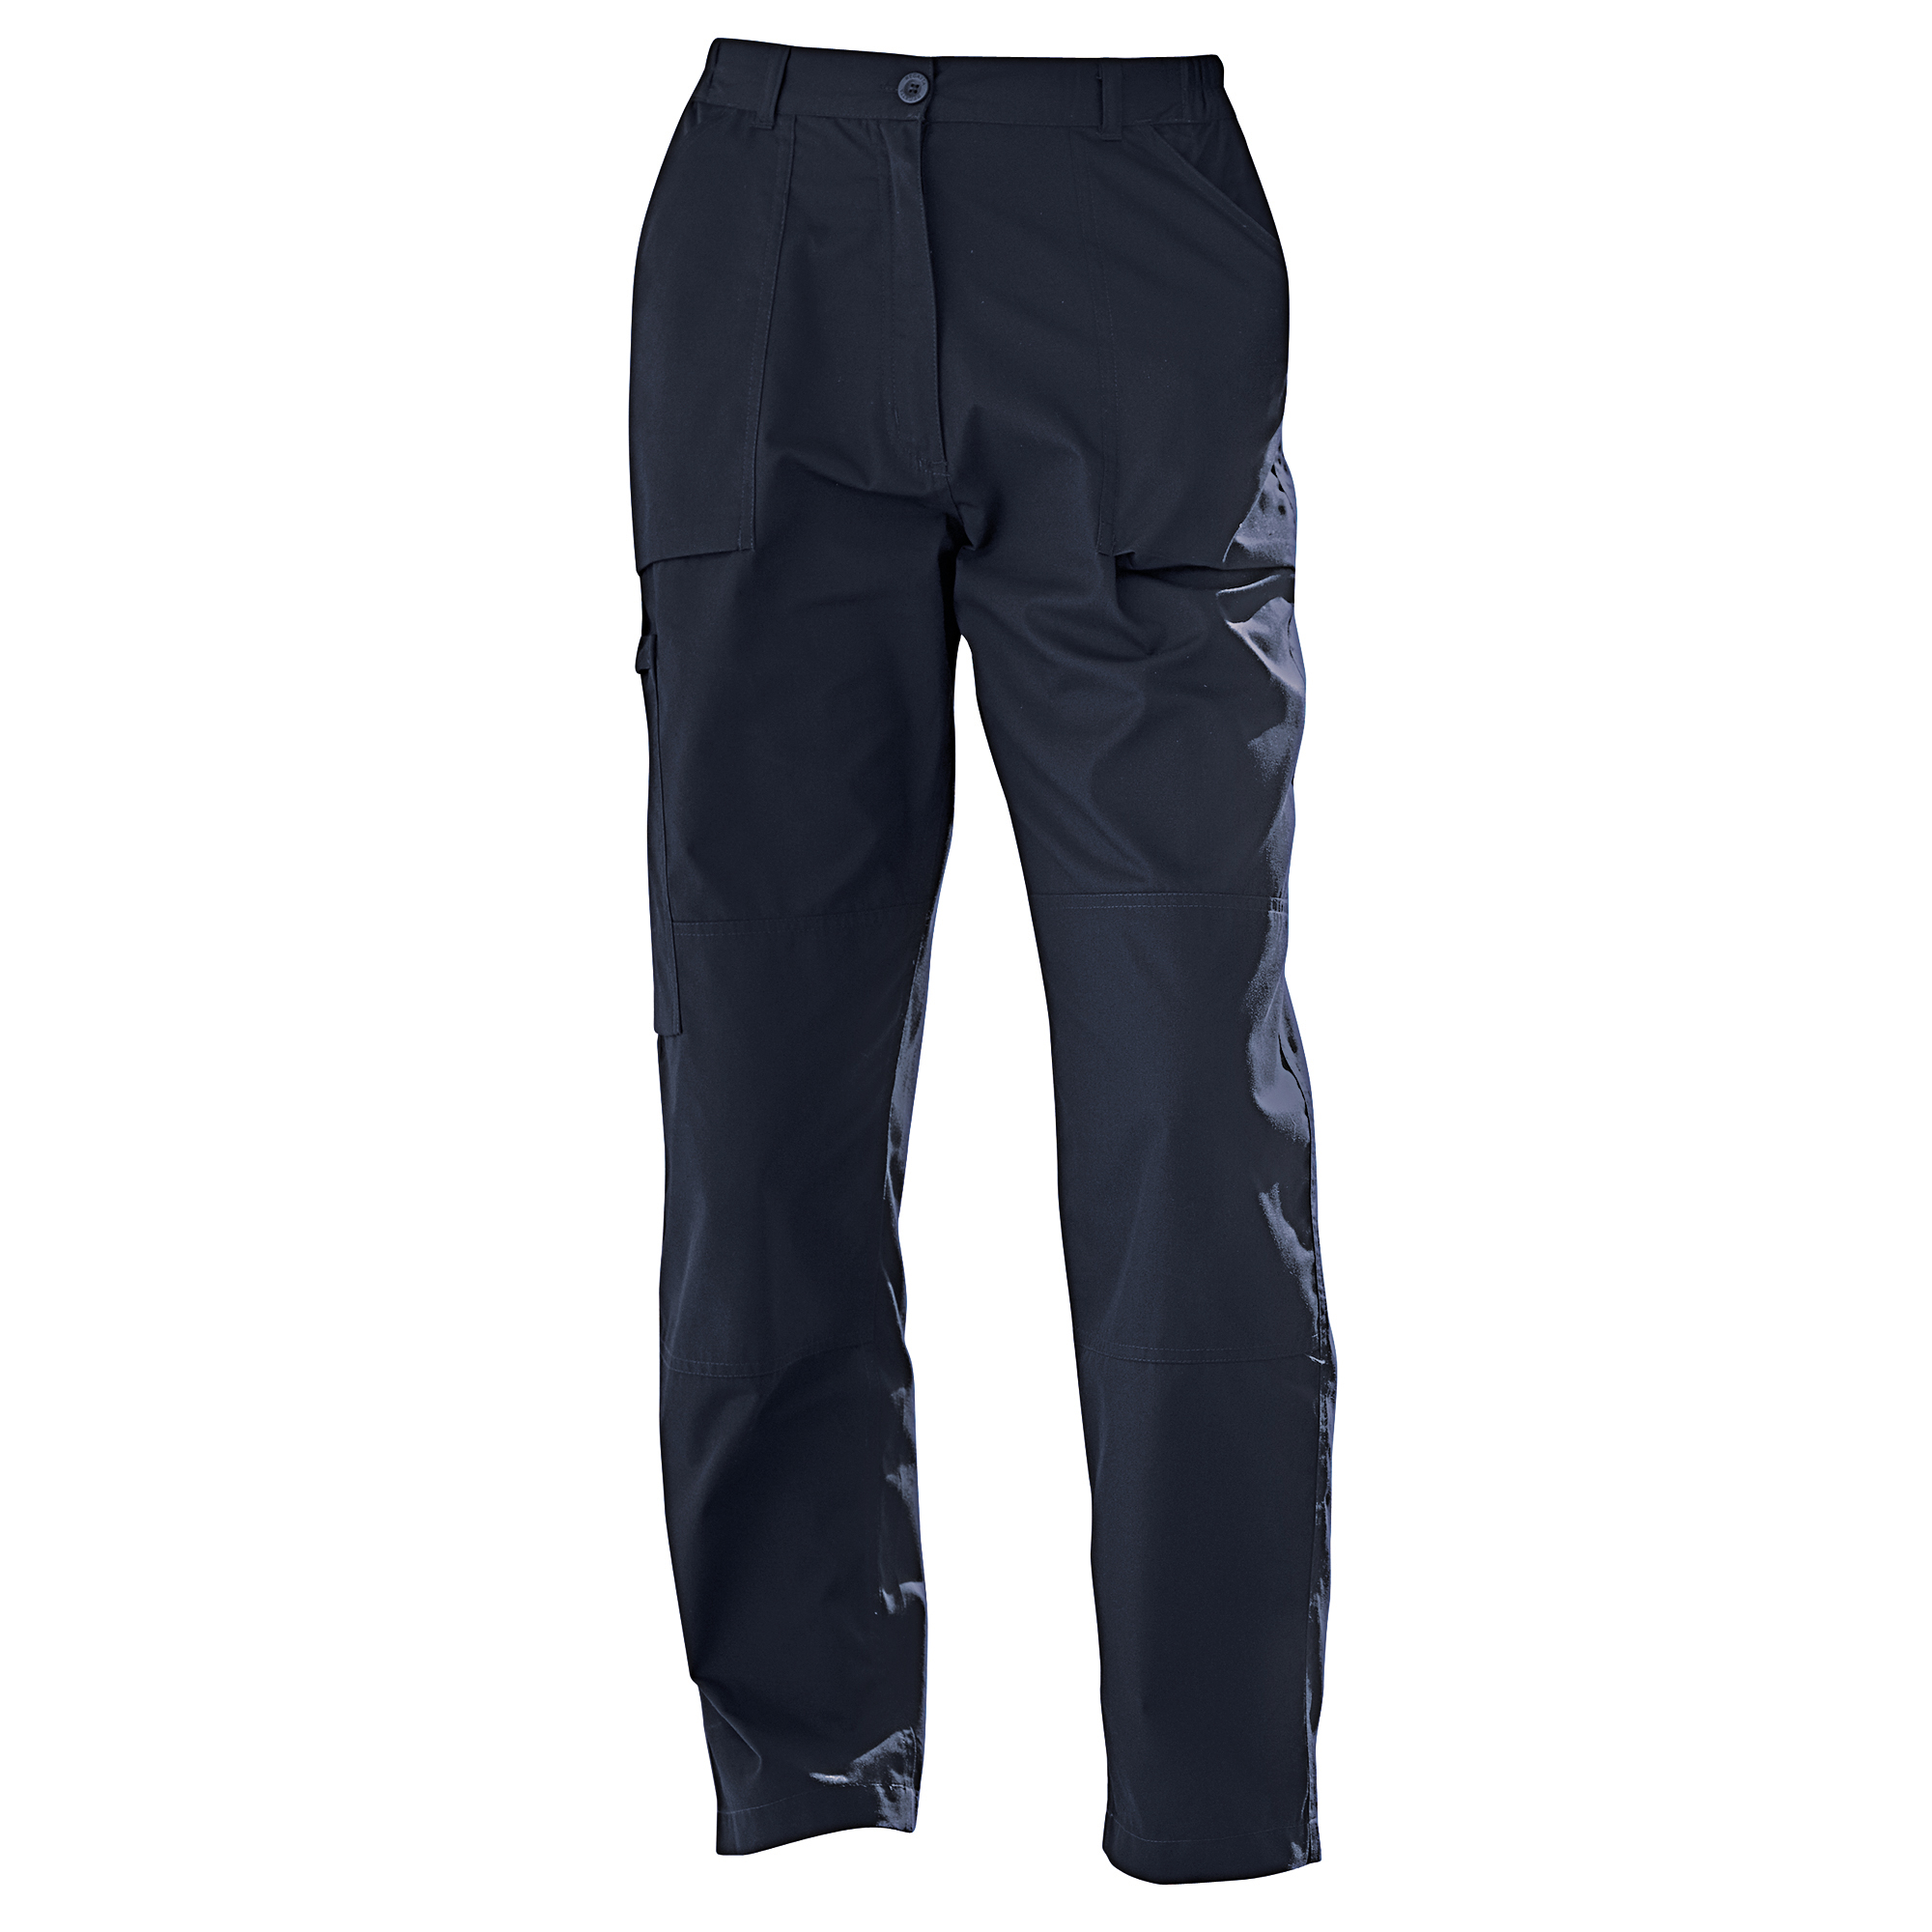 ax-httpswebsystems.s3.amazonaws.comtmp_for_downloadregatta-womens-action-trousers-navy.jpg